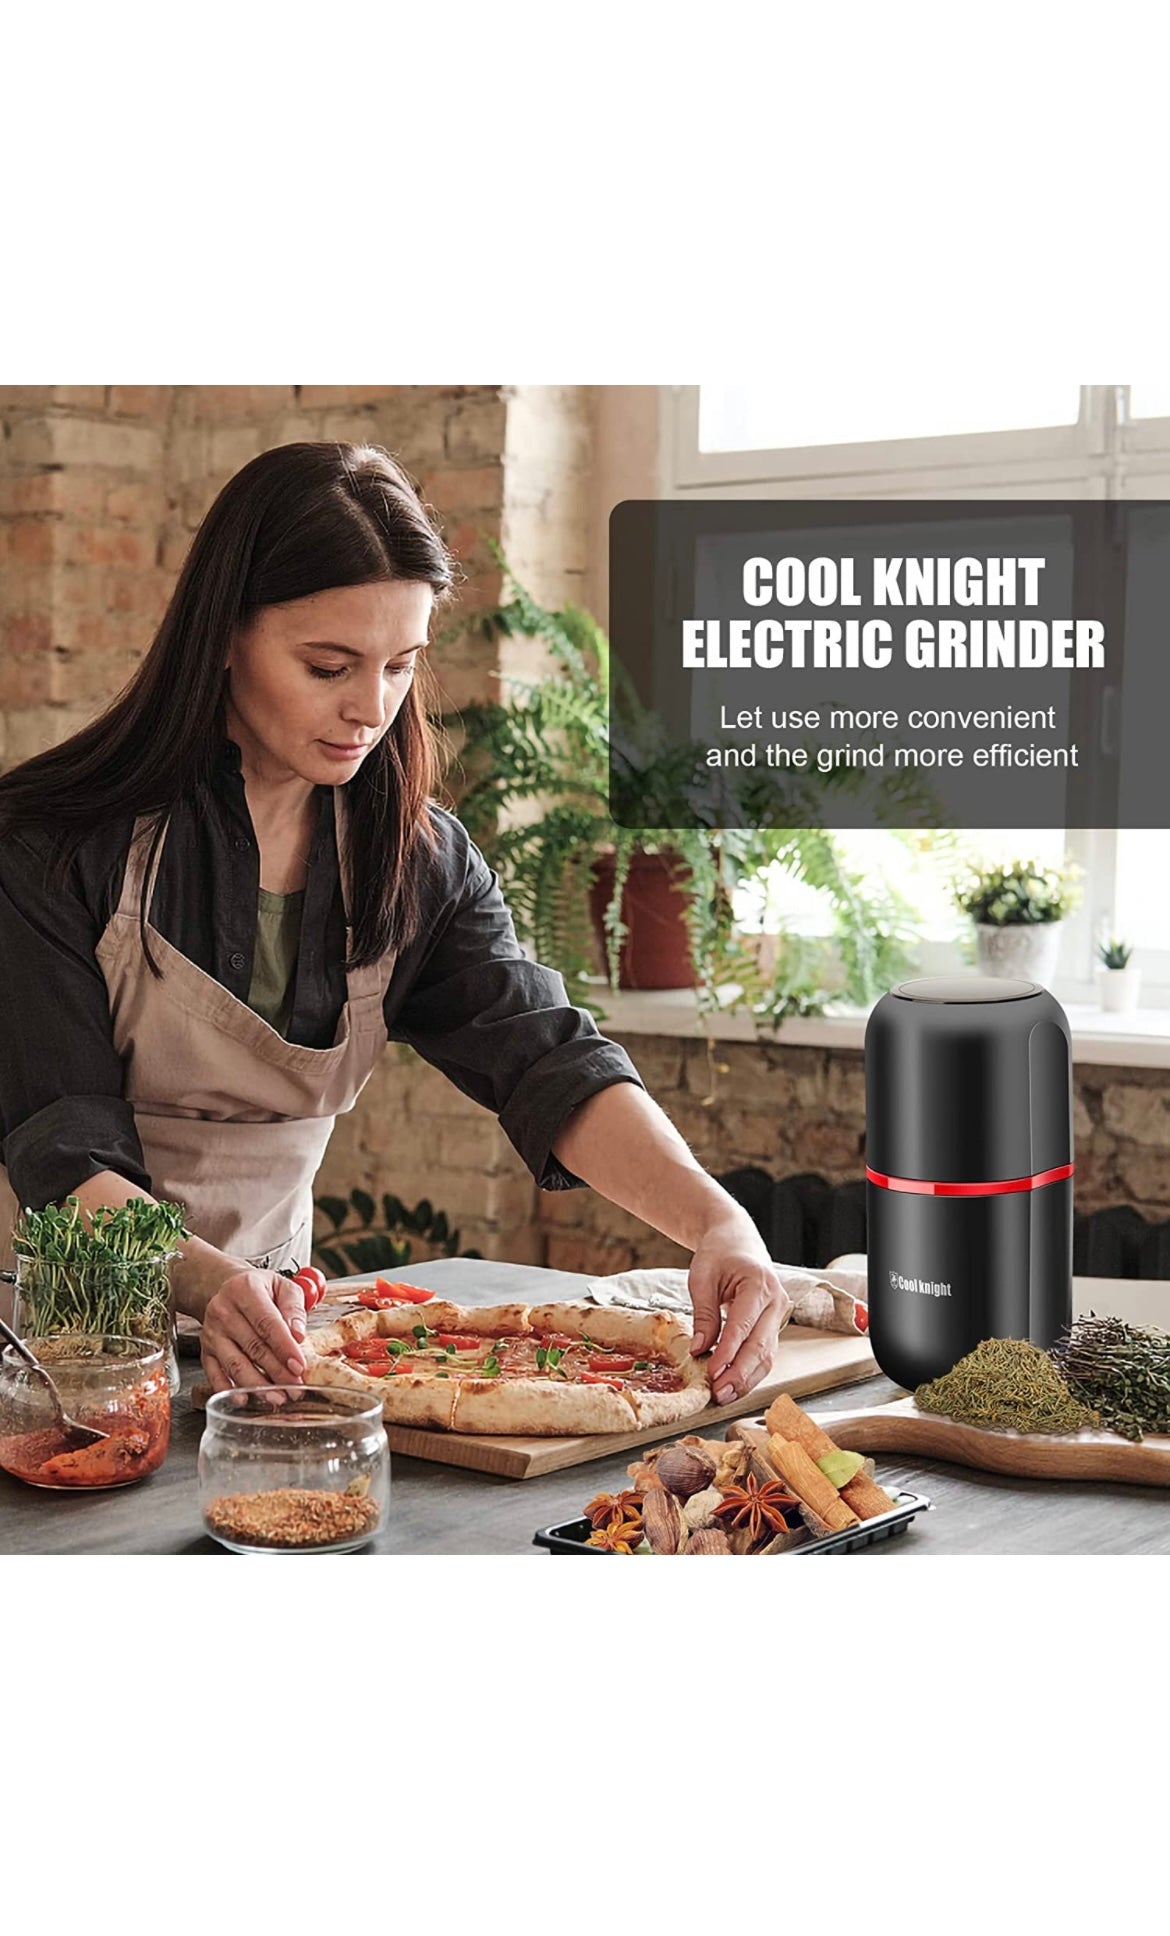  COOL KNIGHT Herb Grinder [large capacity/fast/Electric ]-Spice  Herb Coffee Grinder with Pollen Catcher/- 7.5 (Grey): Home & Kitchen